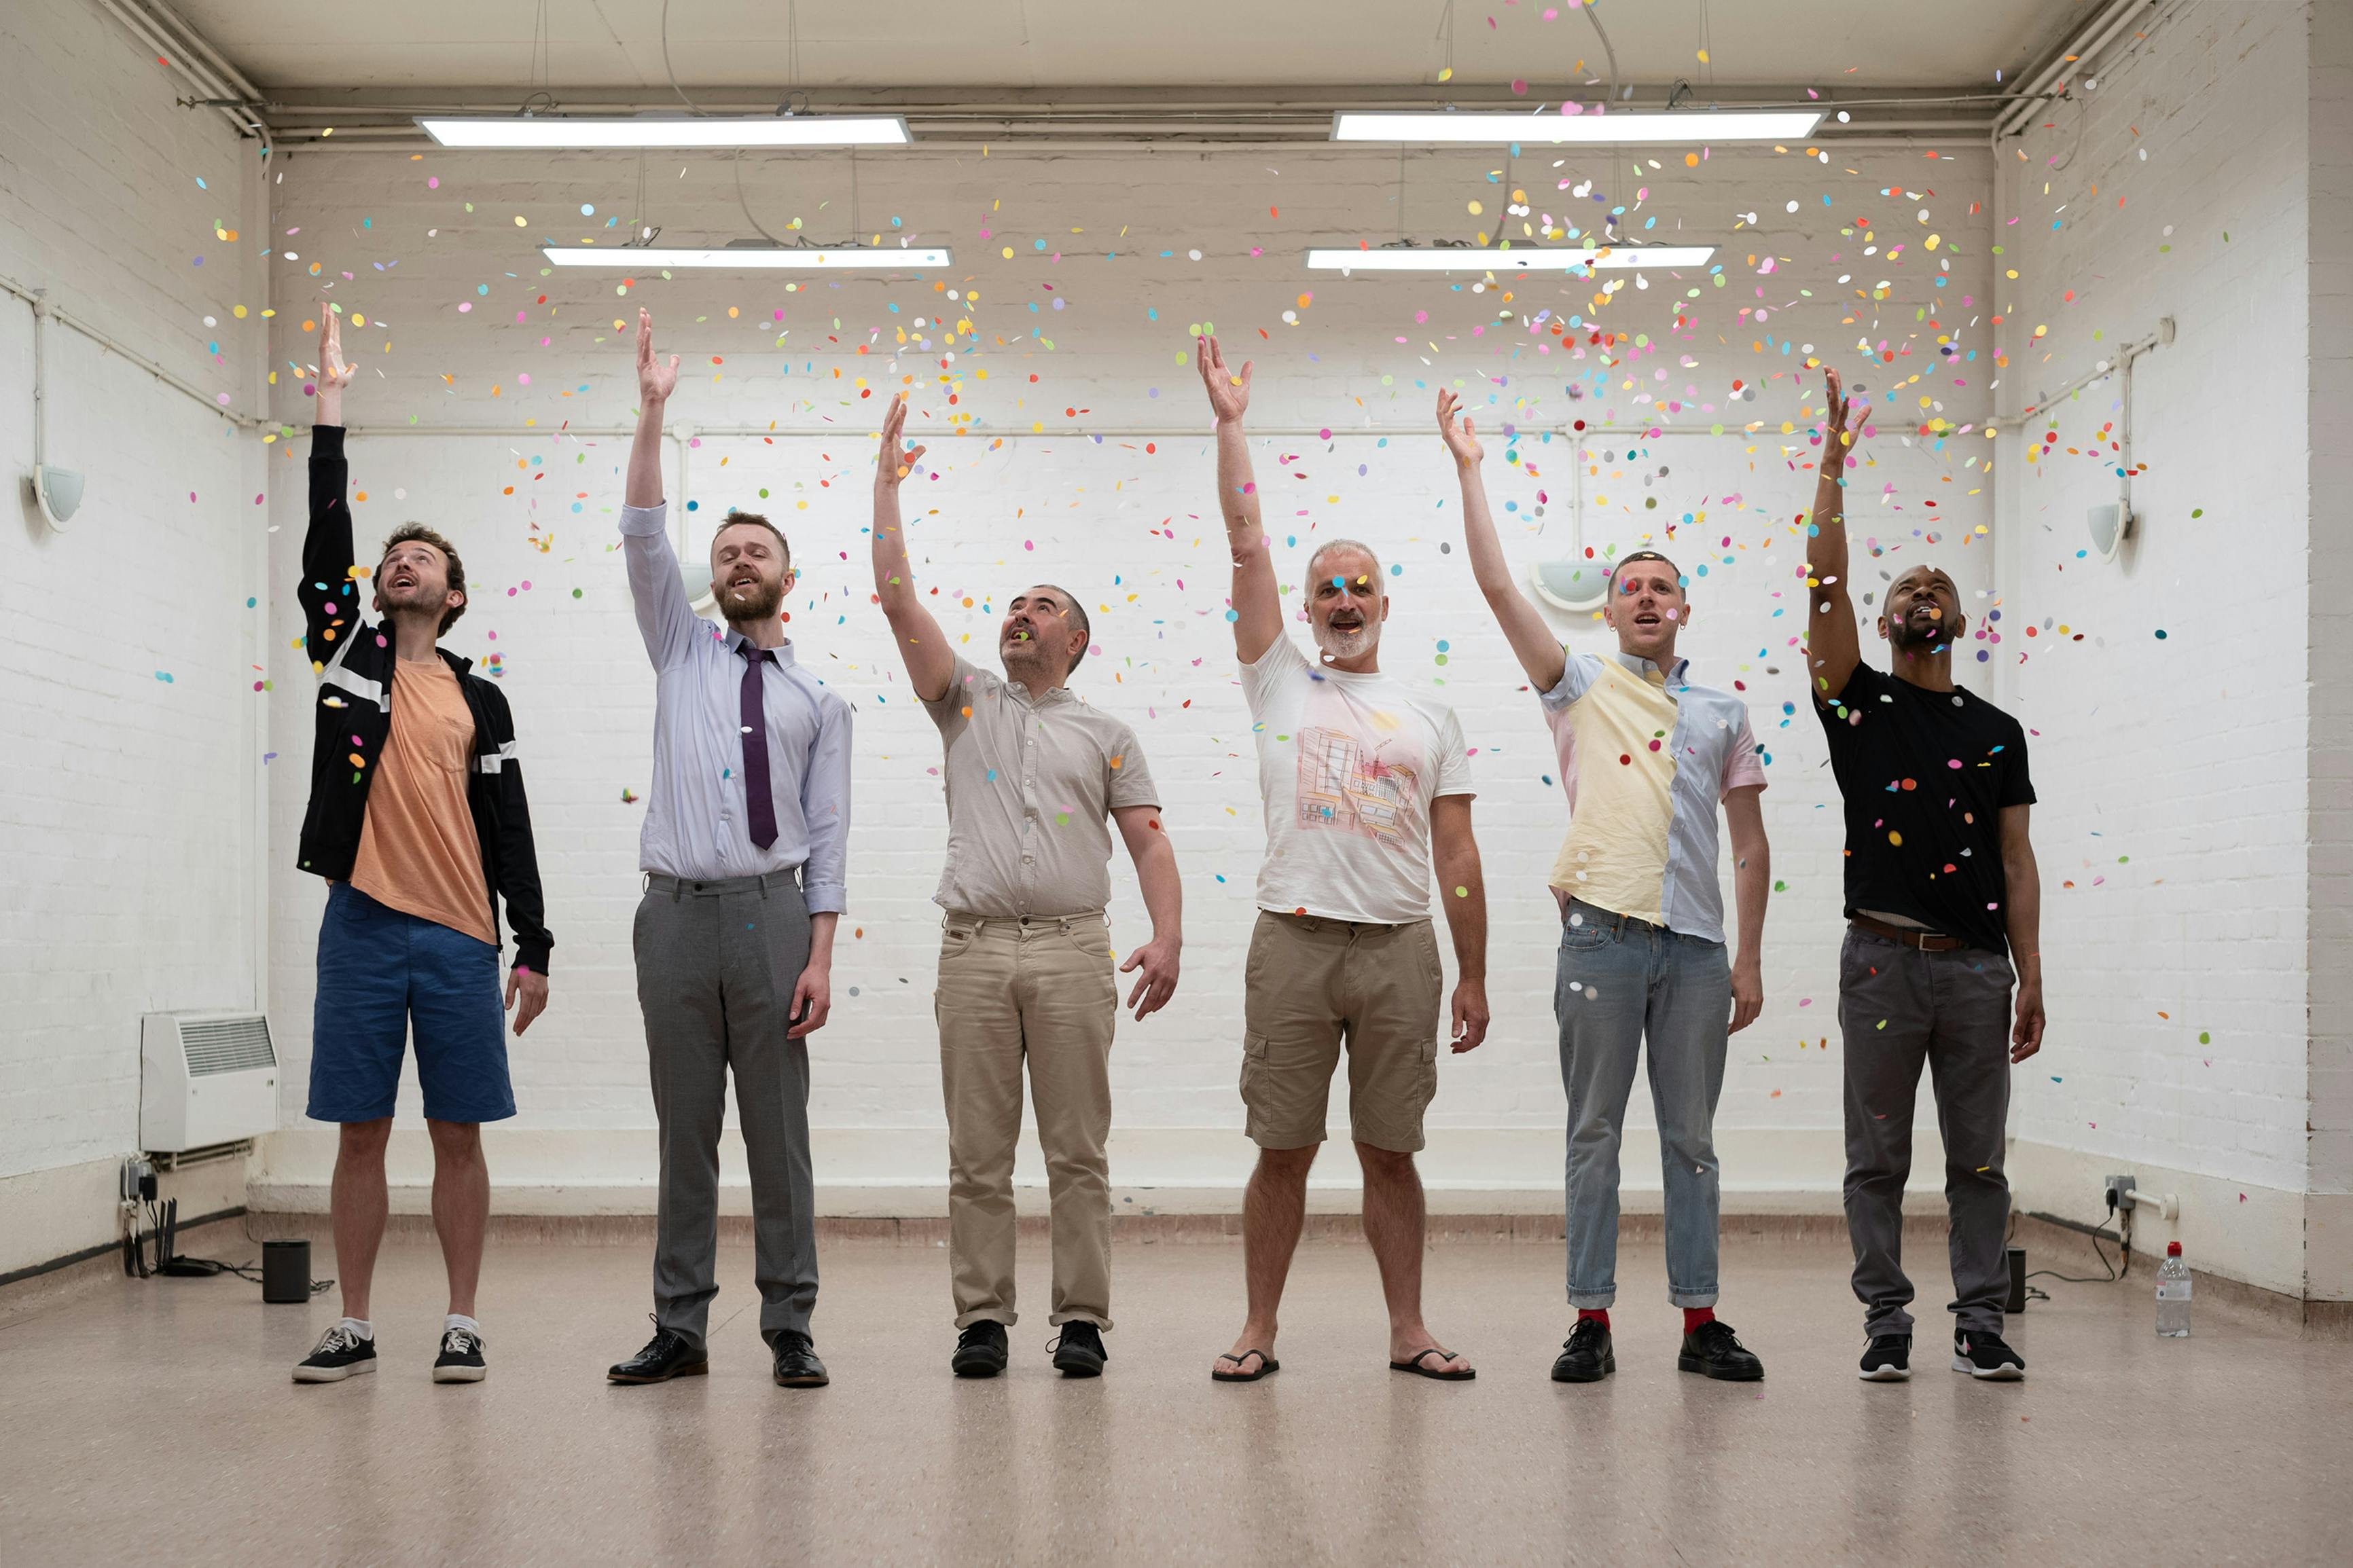 six men of varying ages and ethnicities stand in a line, each throwing confetti up in the air woth their right hands